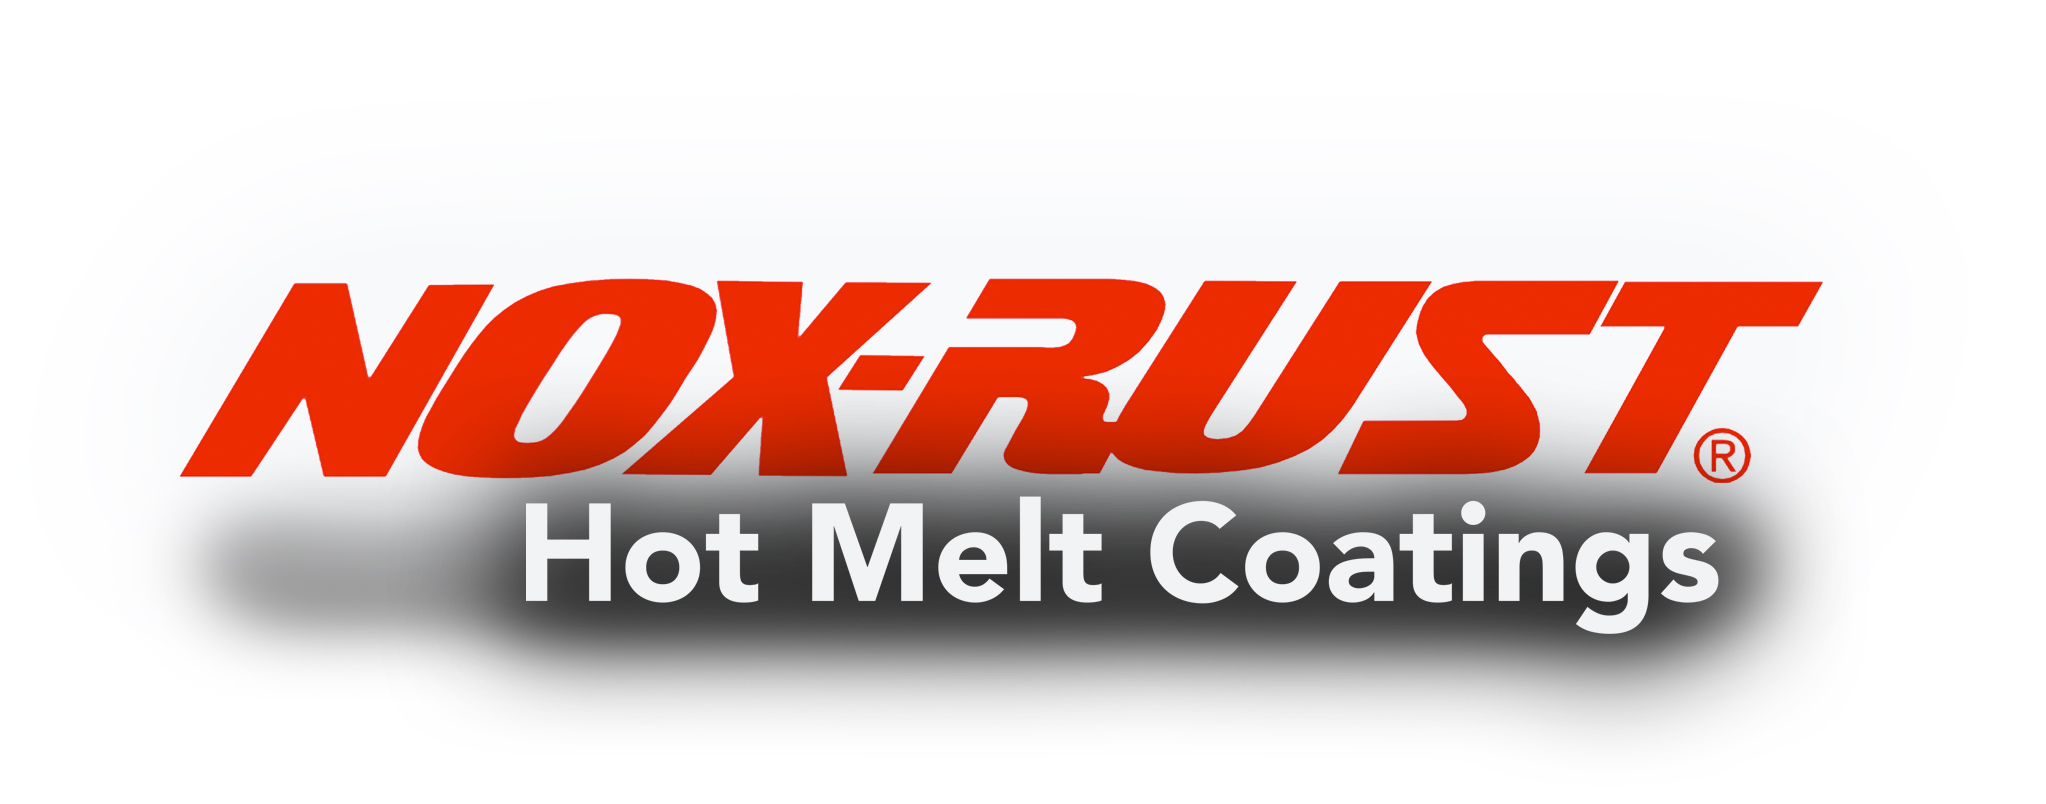 The next-generation Nox-Rust 1290HP has been reformulated to include a nanoscale chemical additive that complements the product’s original molecular makeup, creating a protective barrier.